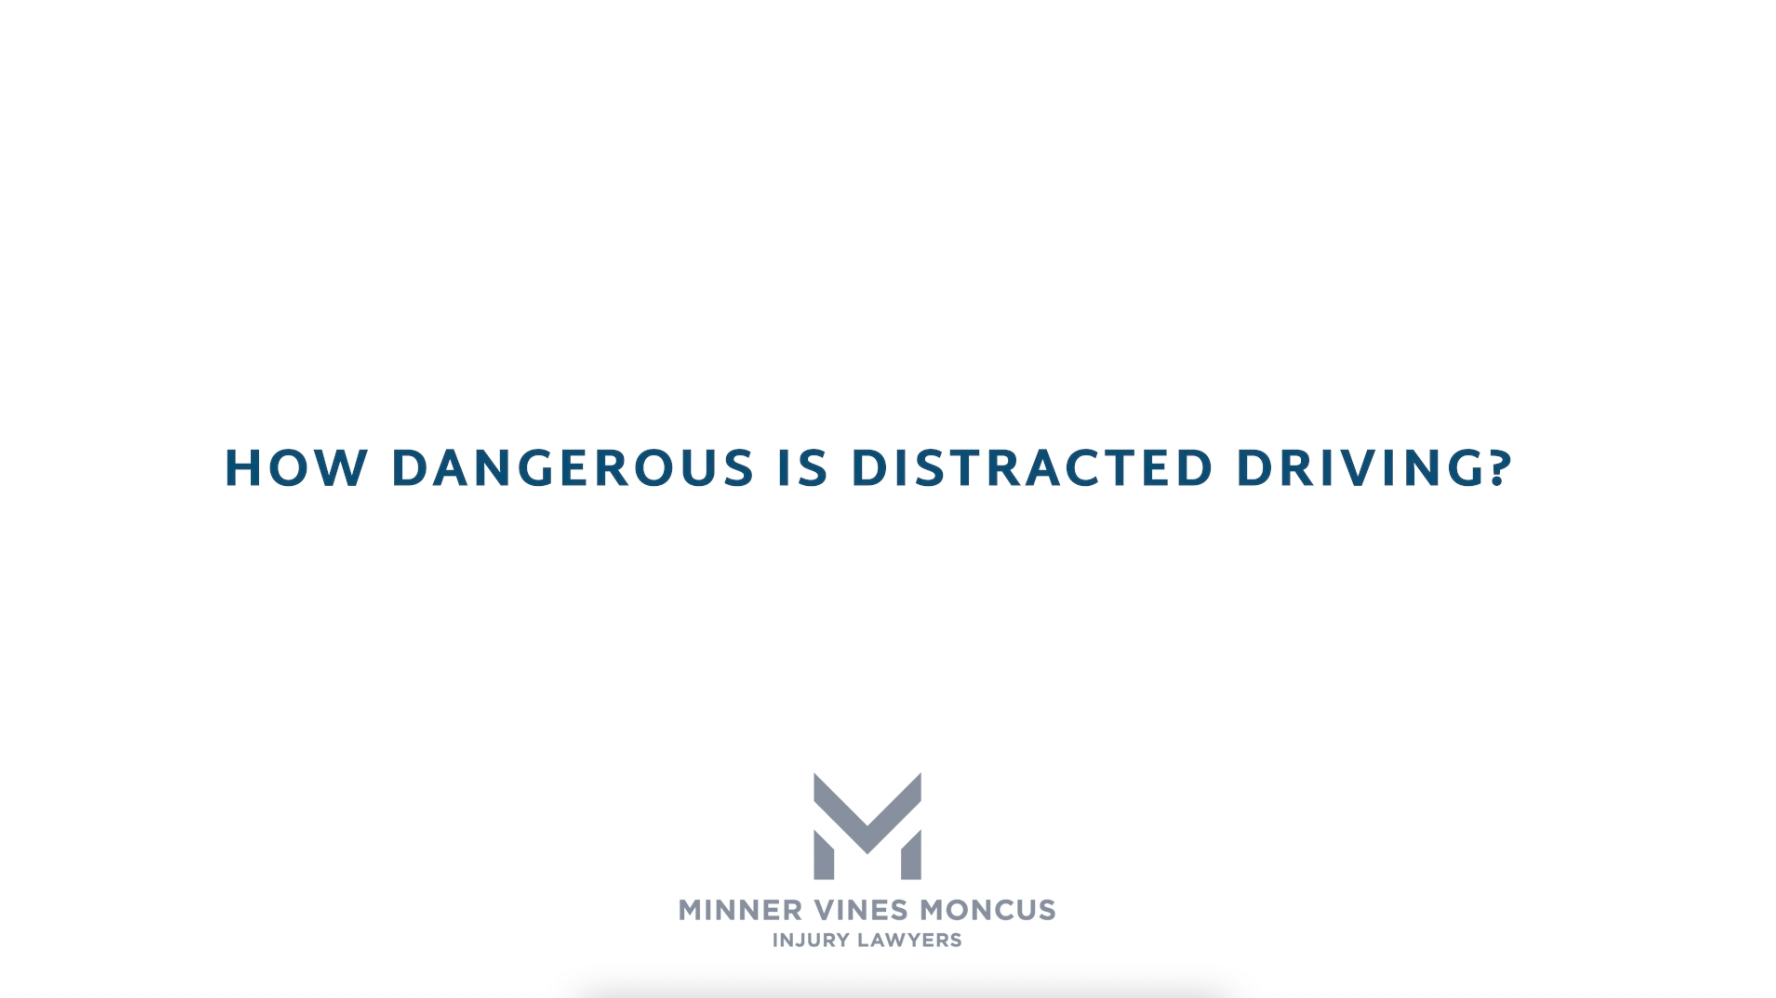 How dangerous is distracted driving?